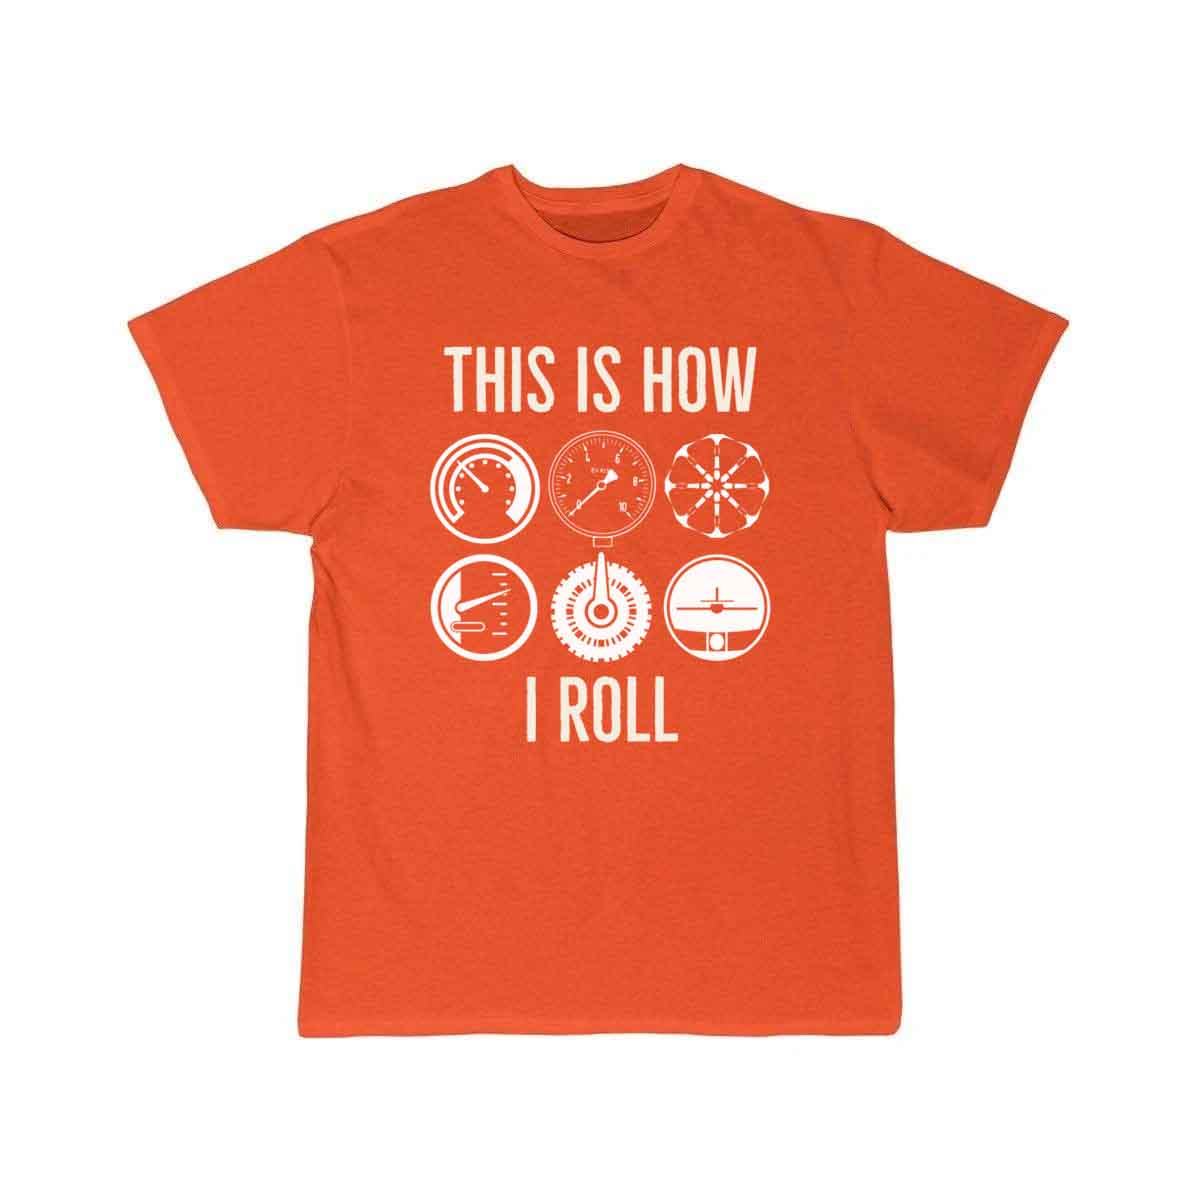 This is how we roll T SHIRT THE AV8R